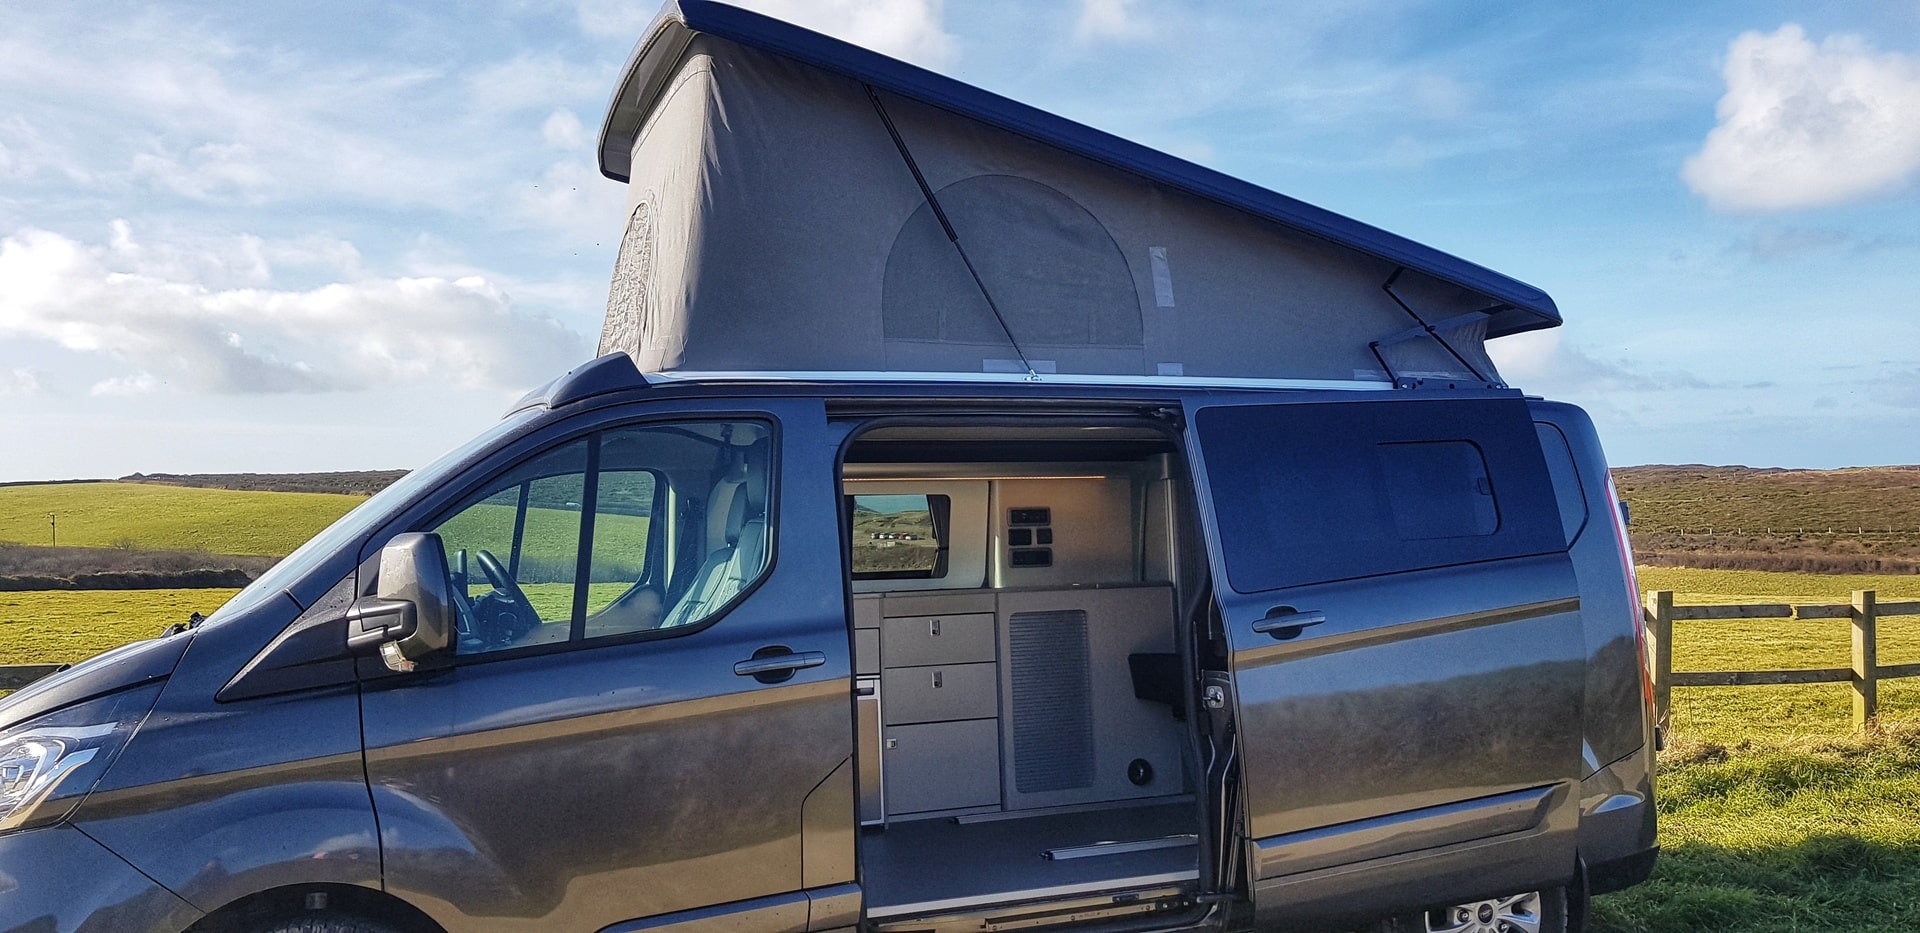 Yeti Campervan Conversions Completed Build